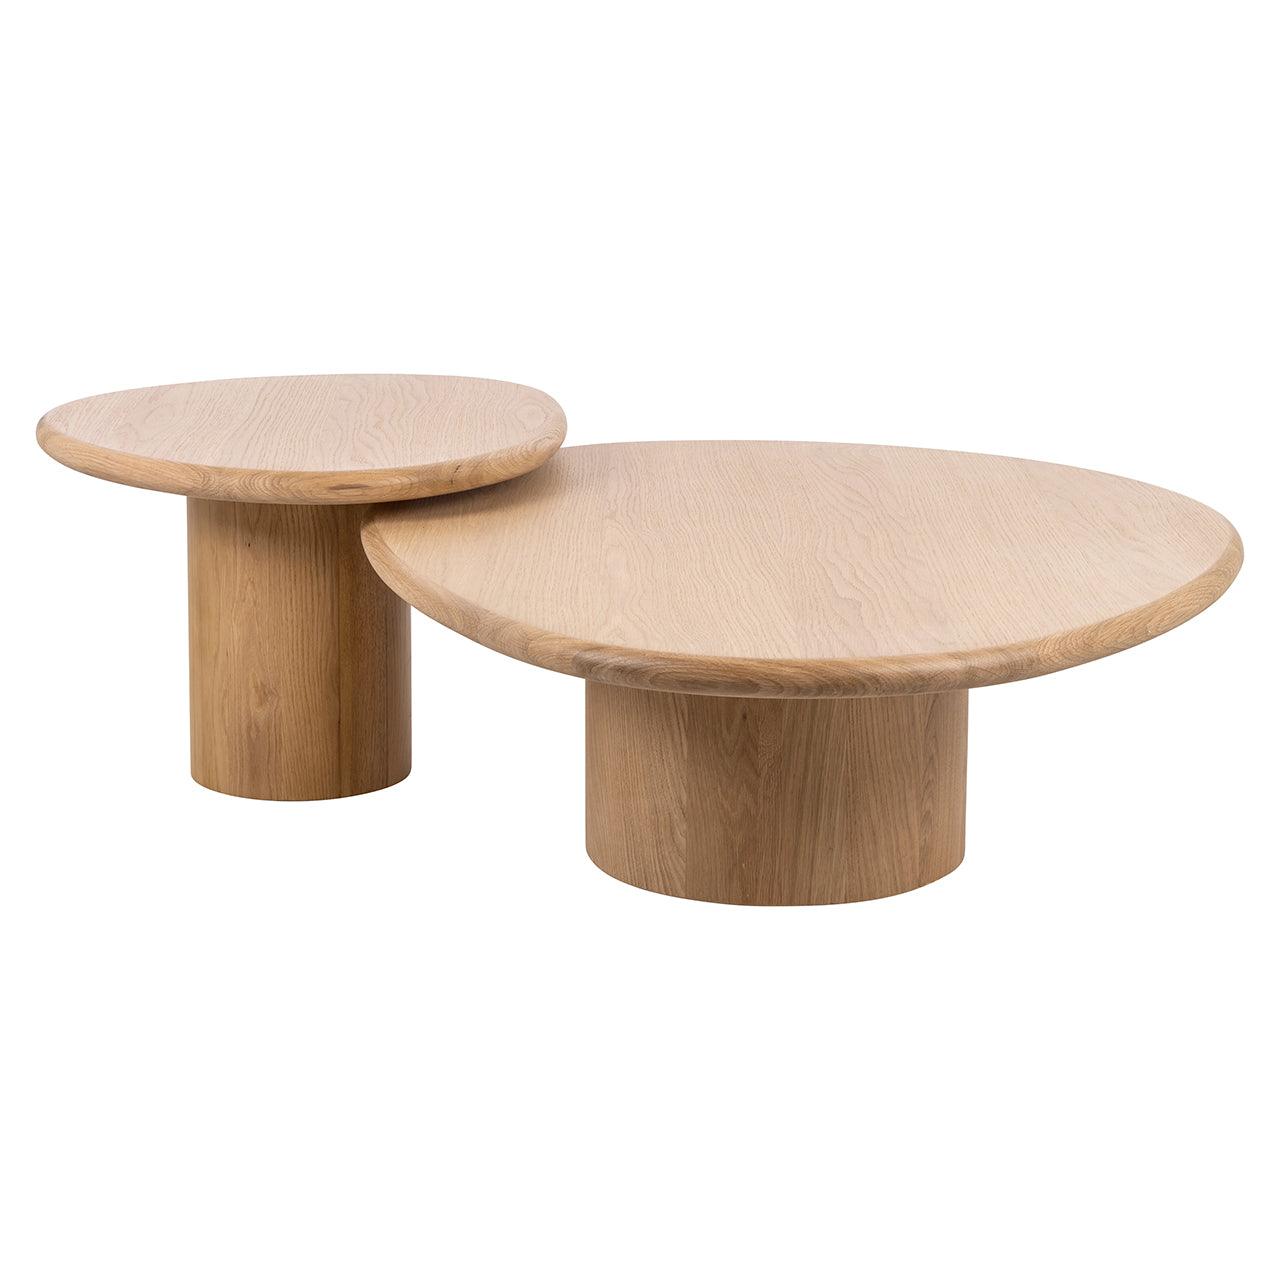 Set of Two Oakley Natural Oak Wood Coffee Tables by Richmond Interiors - Maison Rêves UK